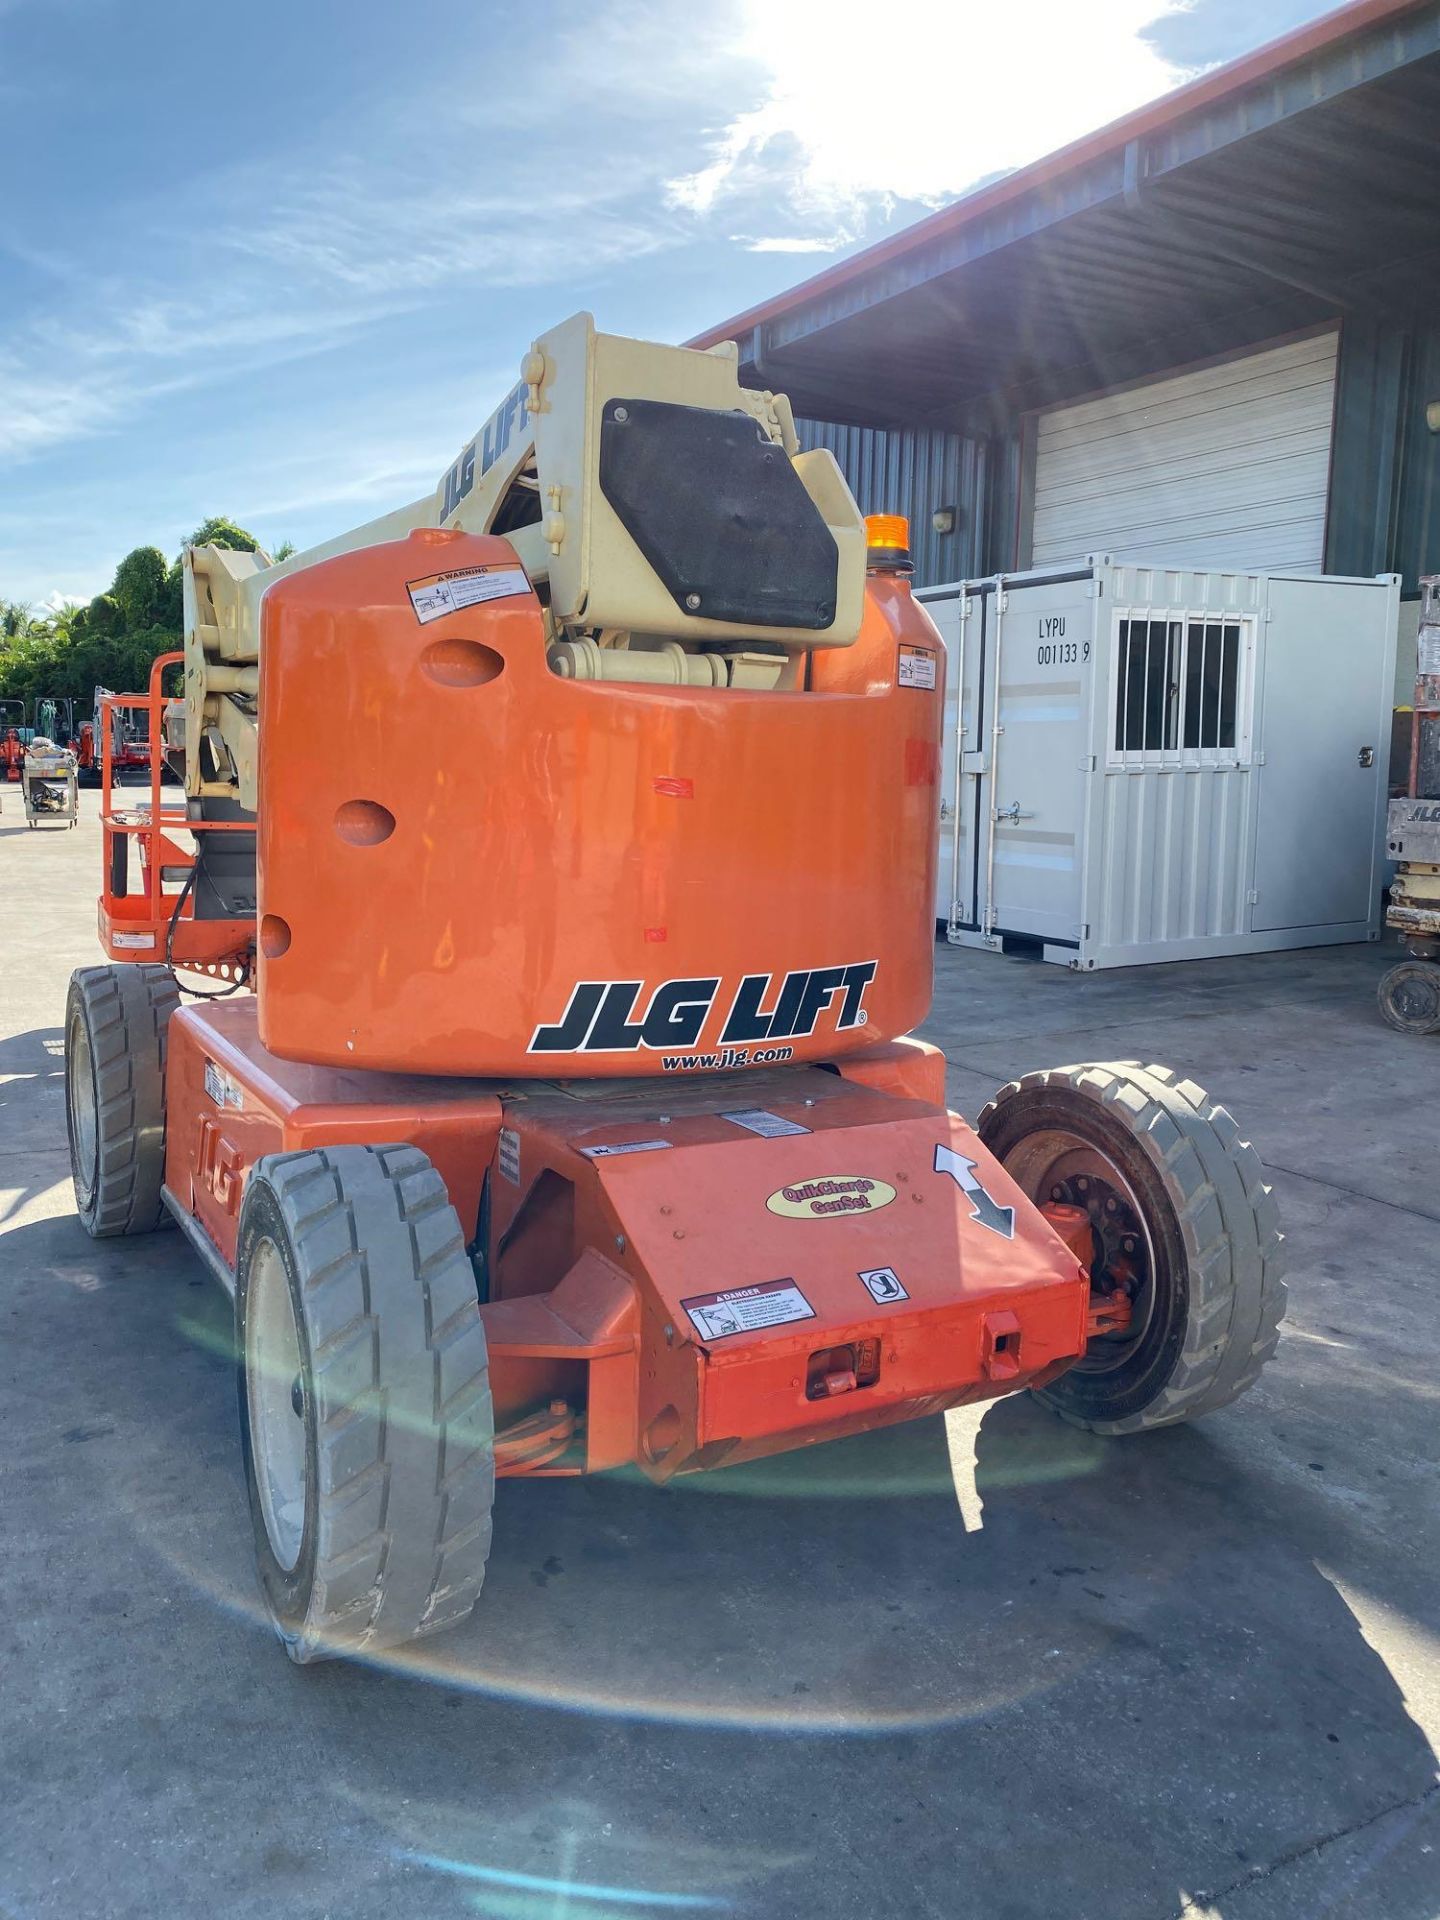 JLG E450A ARTICULATING BOOM LIFT, ELECTRIC 45’ PLATFORM HEIGHT, RUNS AND OPERATES - Image 3 of 10